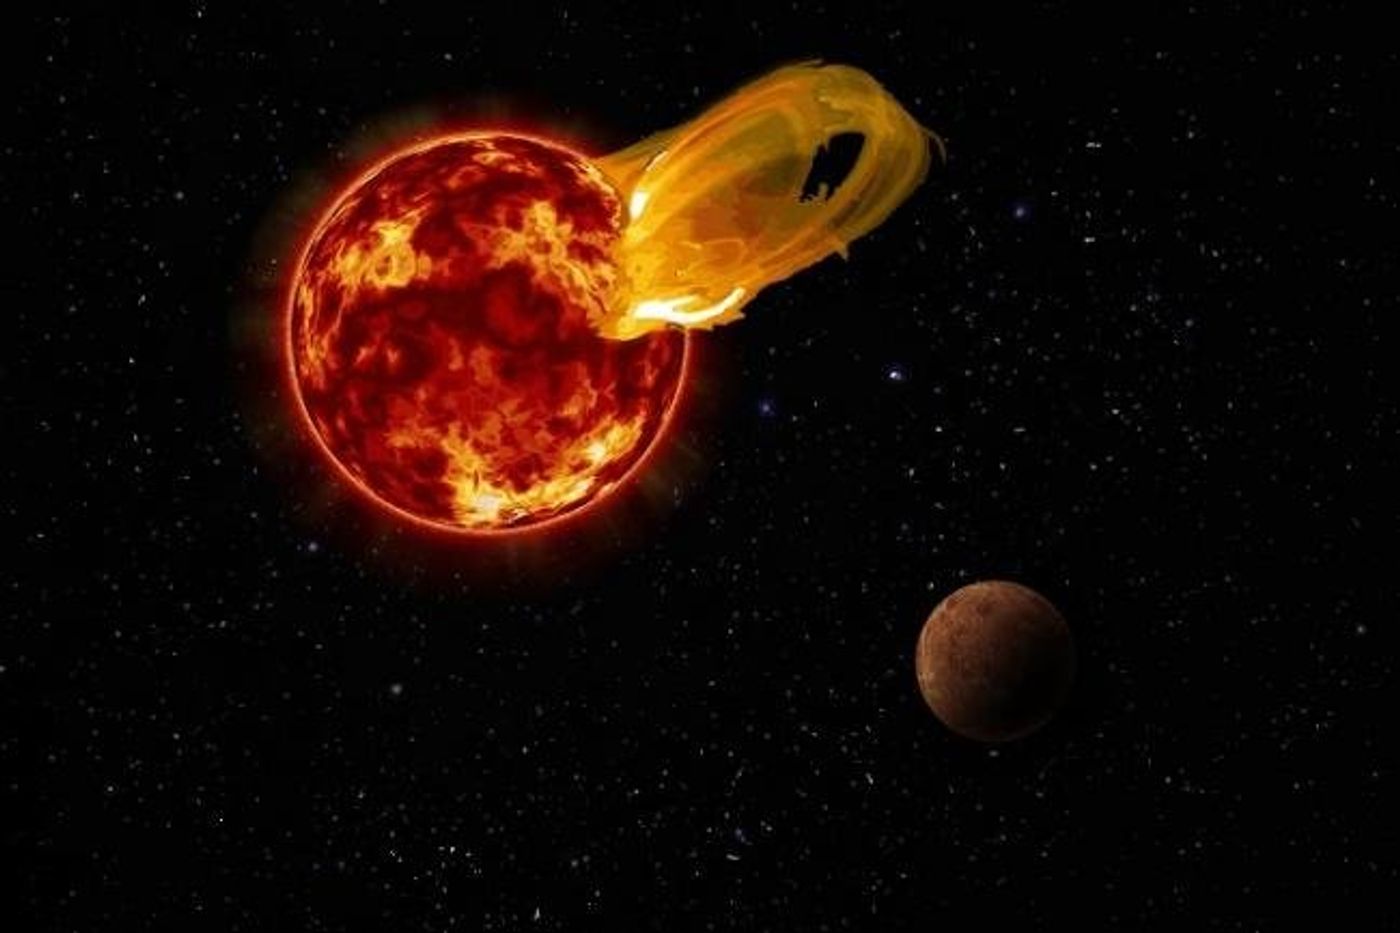 A massive solar flare eminating from Proxima Centauri last year suggests that Proxima b may not be a habitable exoplanet after all.